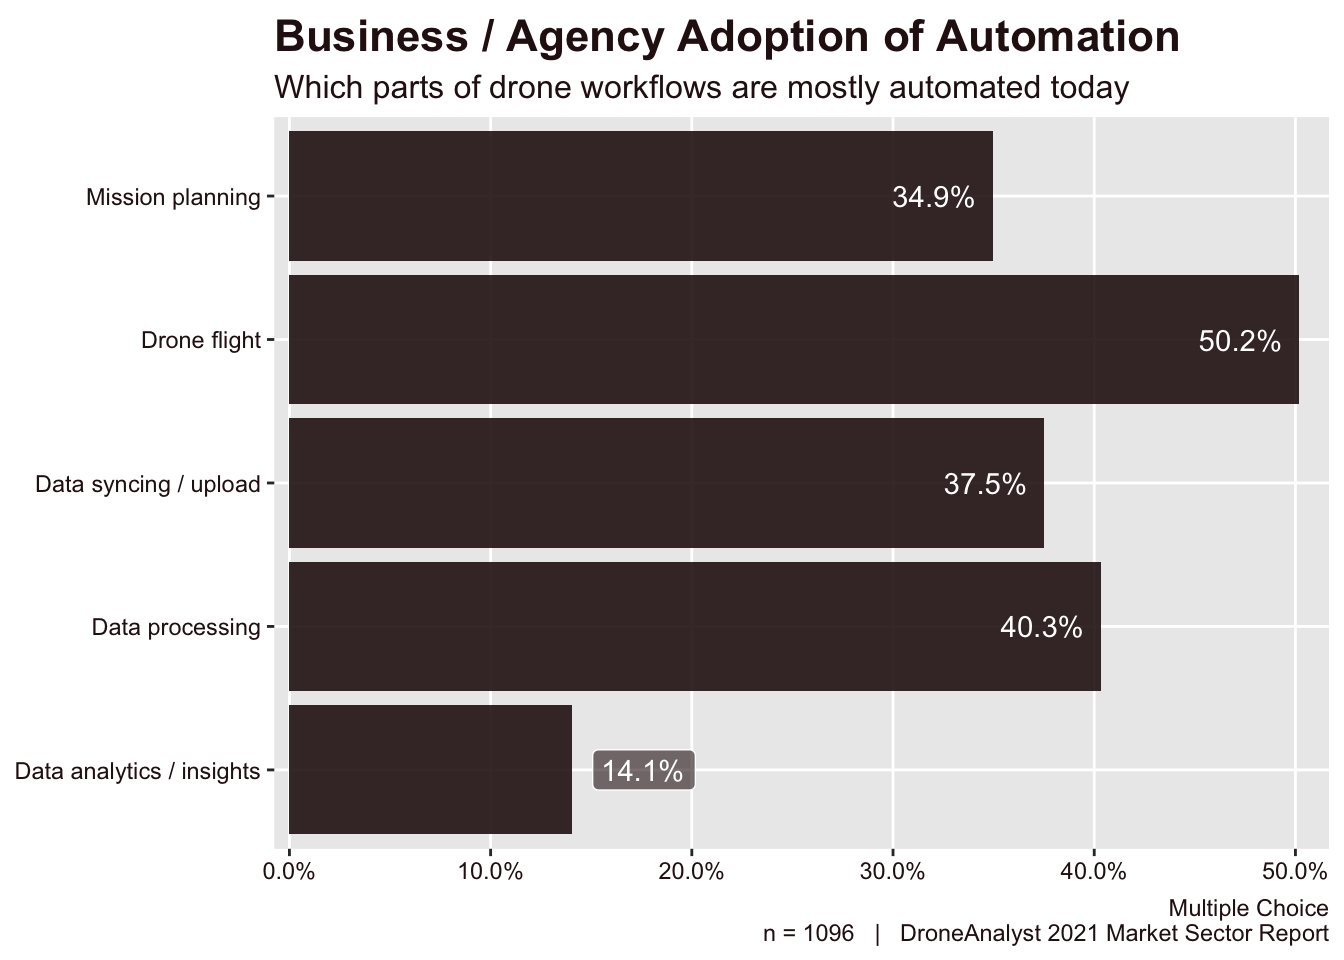 Business / Agency Adoption of Automation